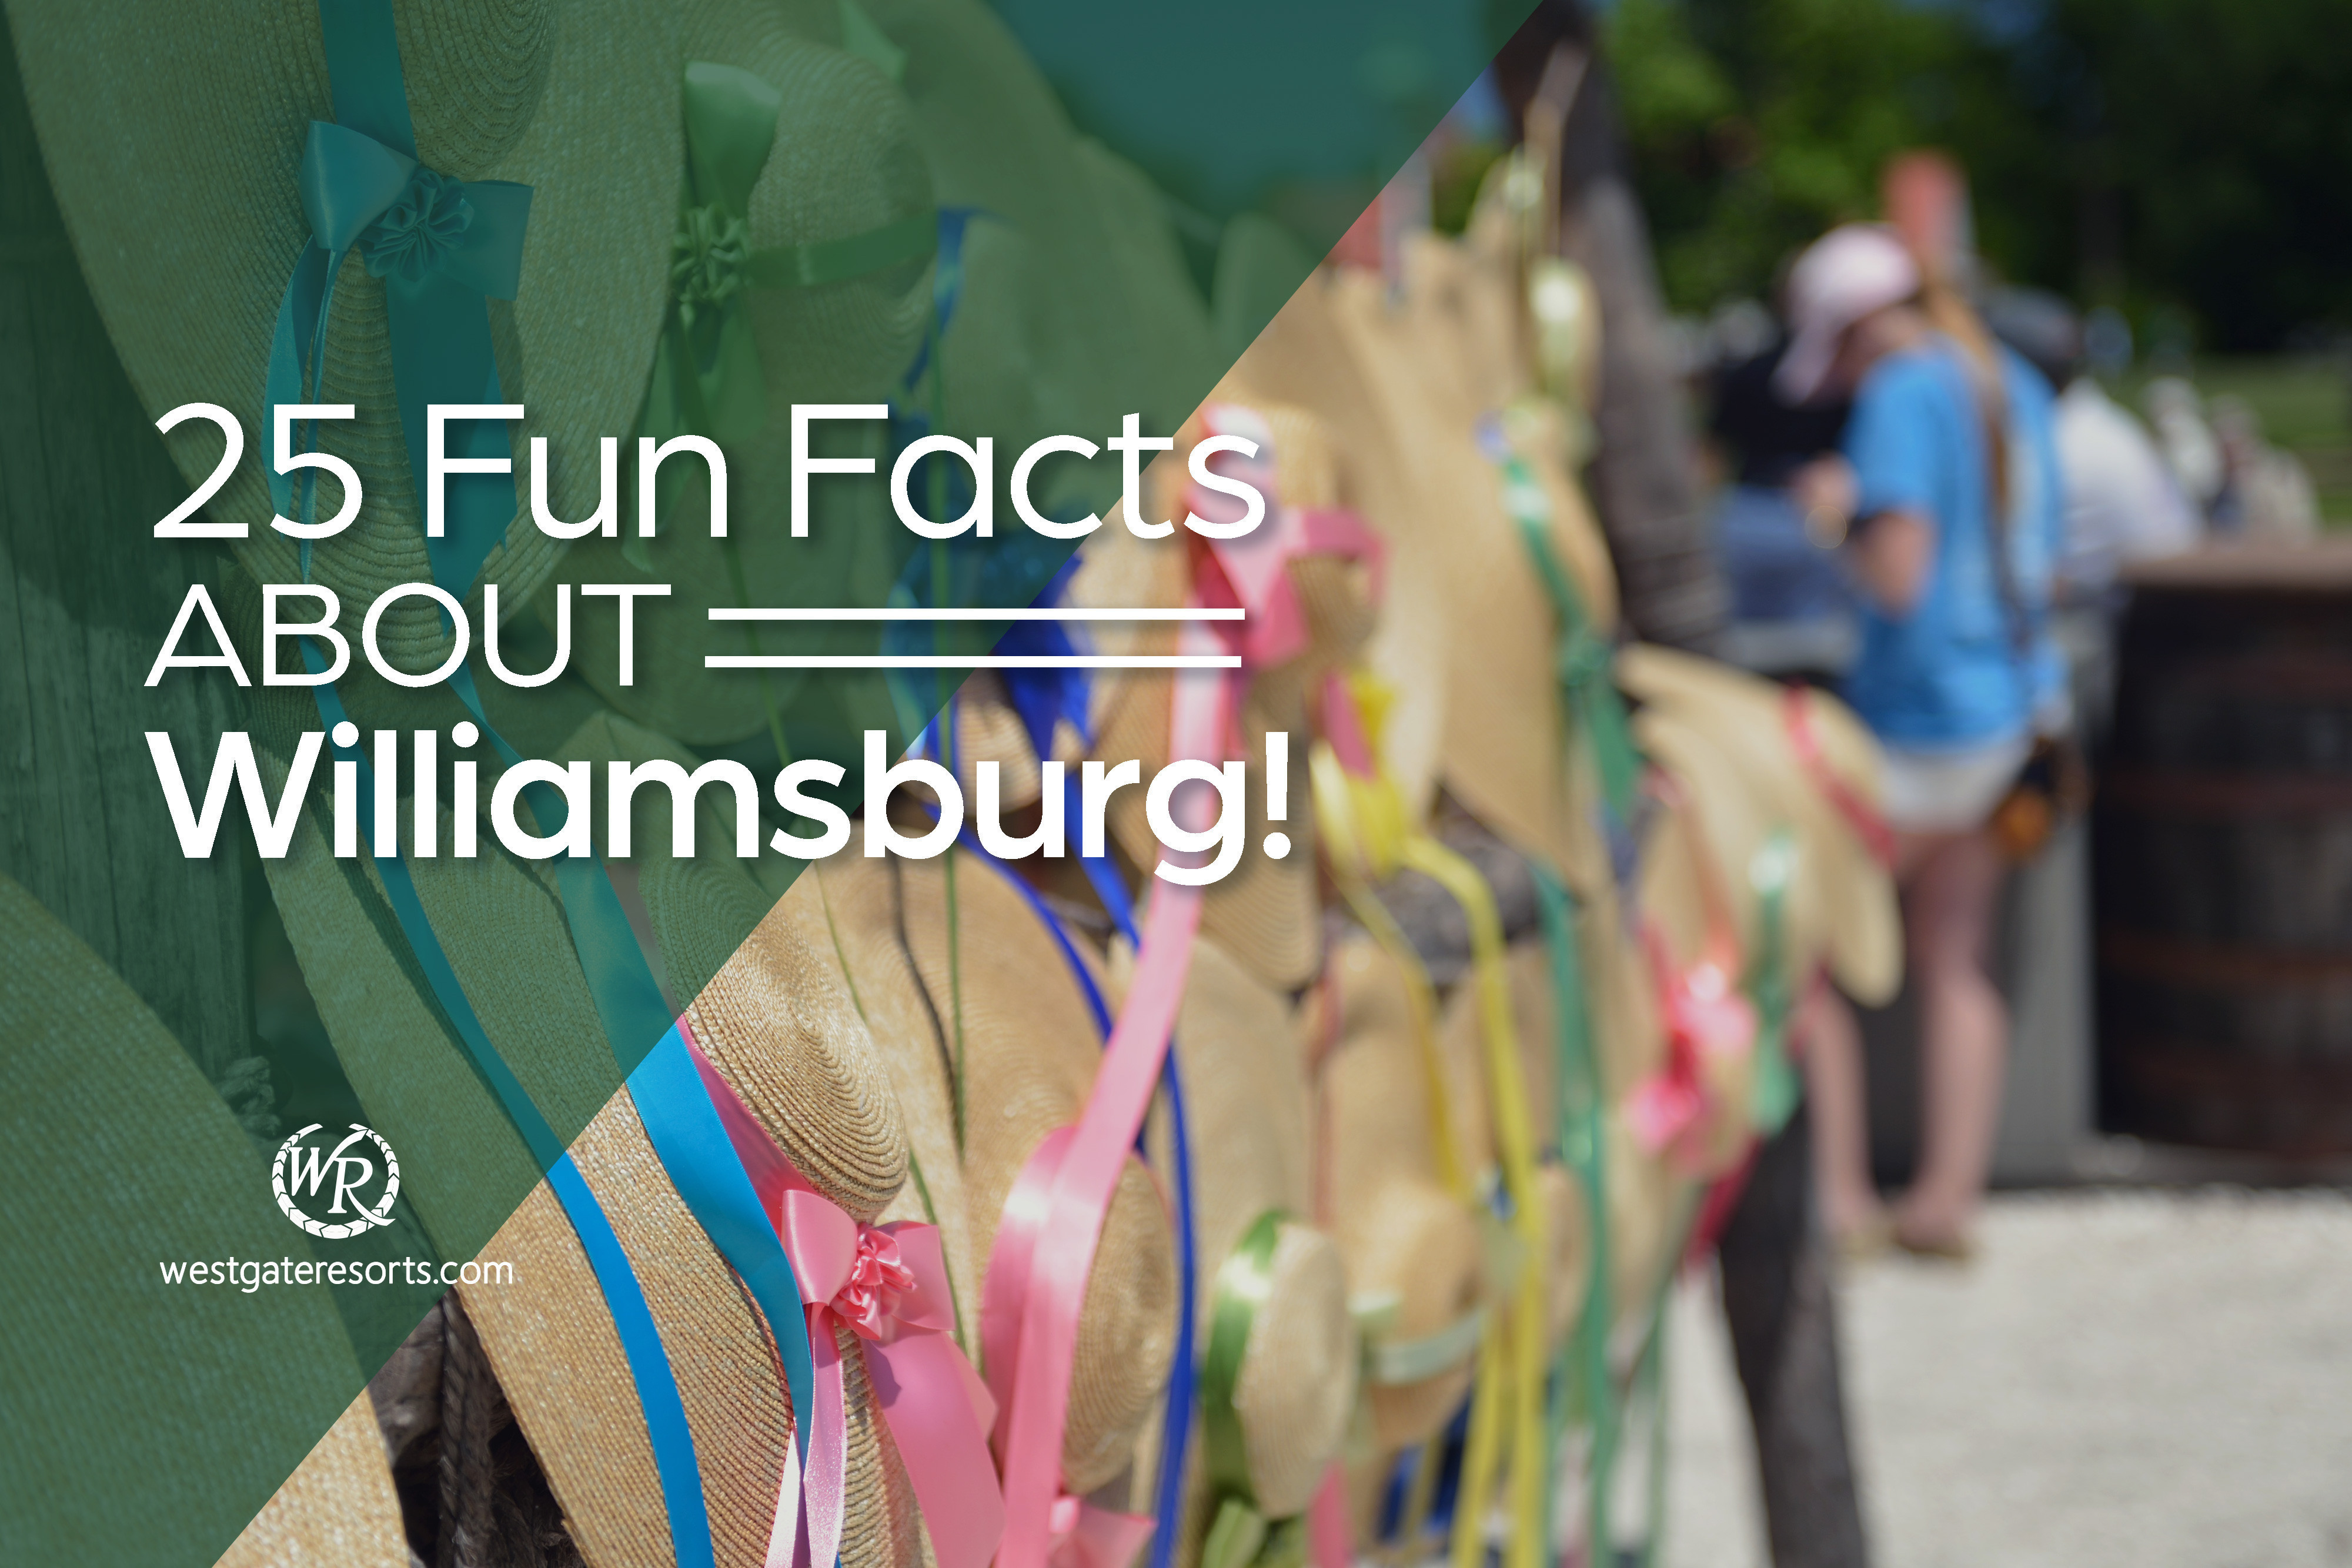 25 Fun Facts About Williamsburg That Will Make You Want to Visit